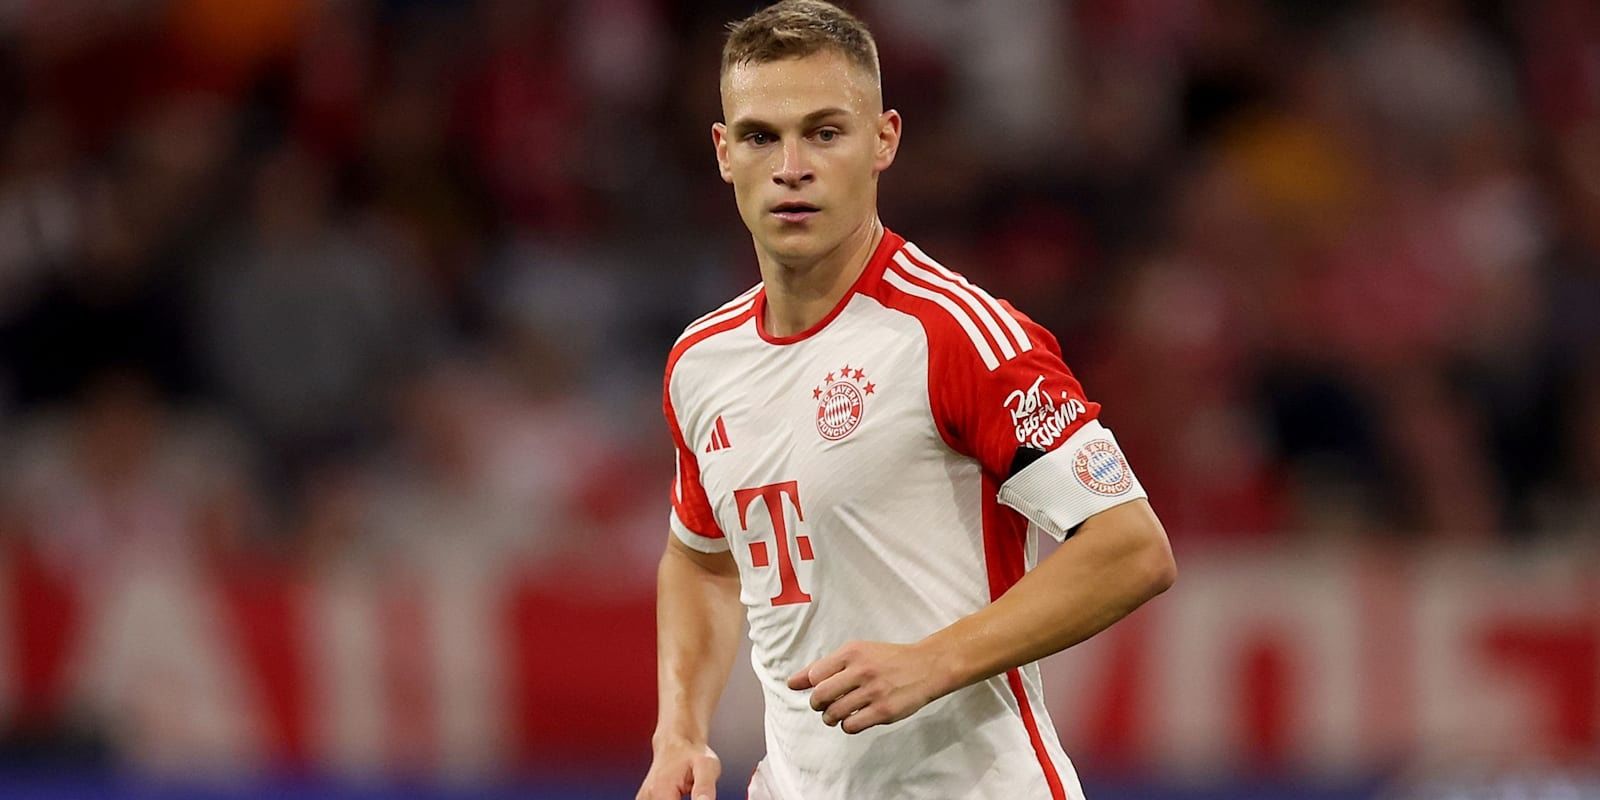 PSG Offers Bayern Mukiele And Money In Exchange For Kimmich